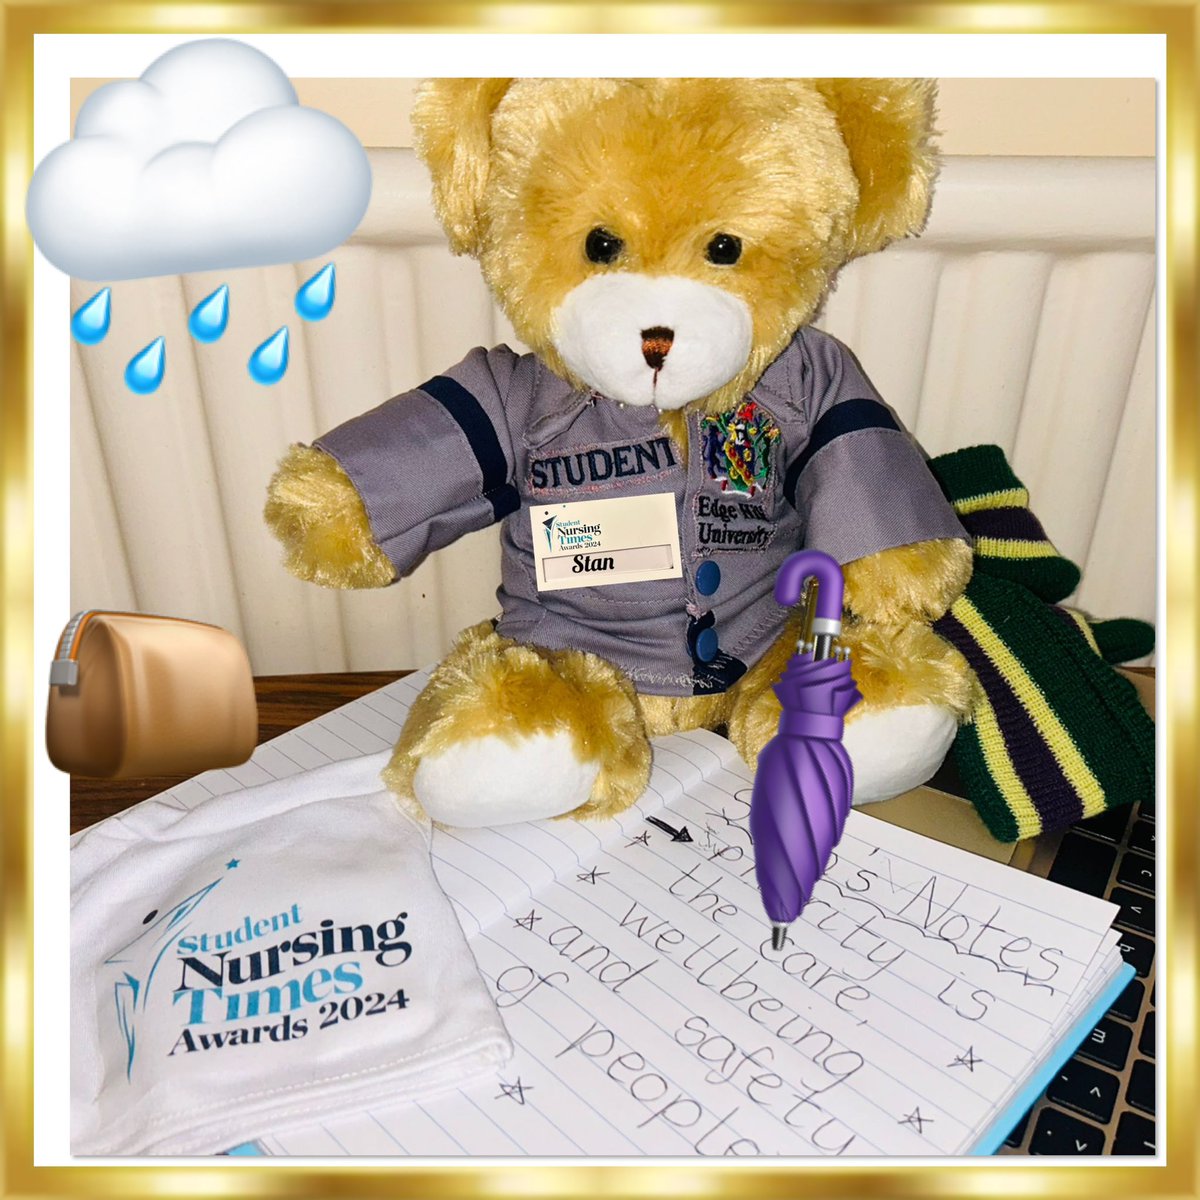 Another day studying for Stan. Today’s topics are all about equality,diversity and inclusion, areas that Stan is interested in. As always he was prepared for the showers on the way to university this morning.@NursingTimes #SNTABear